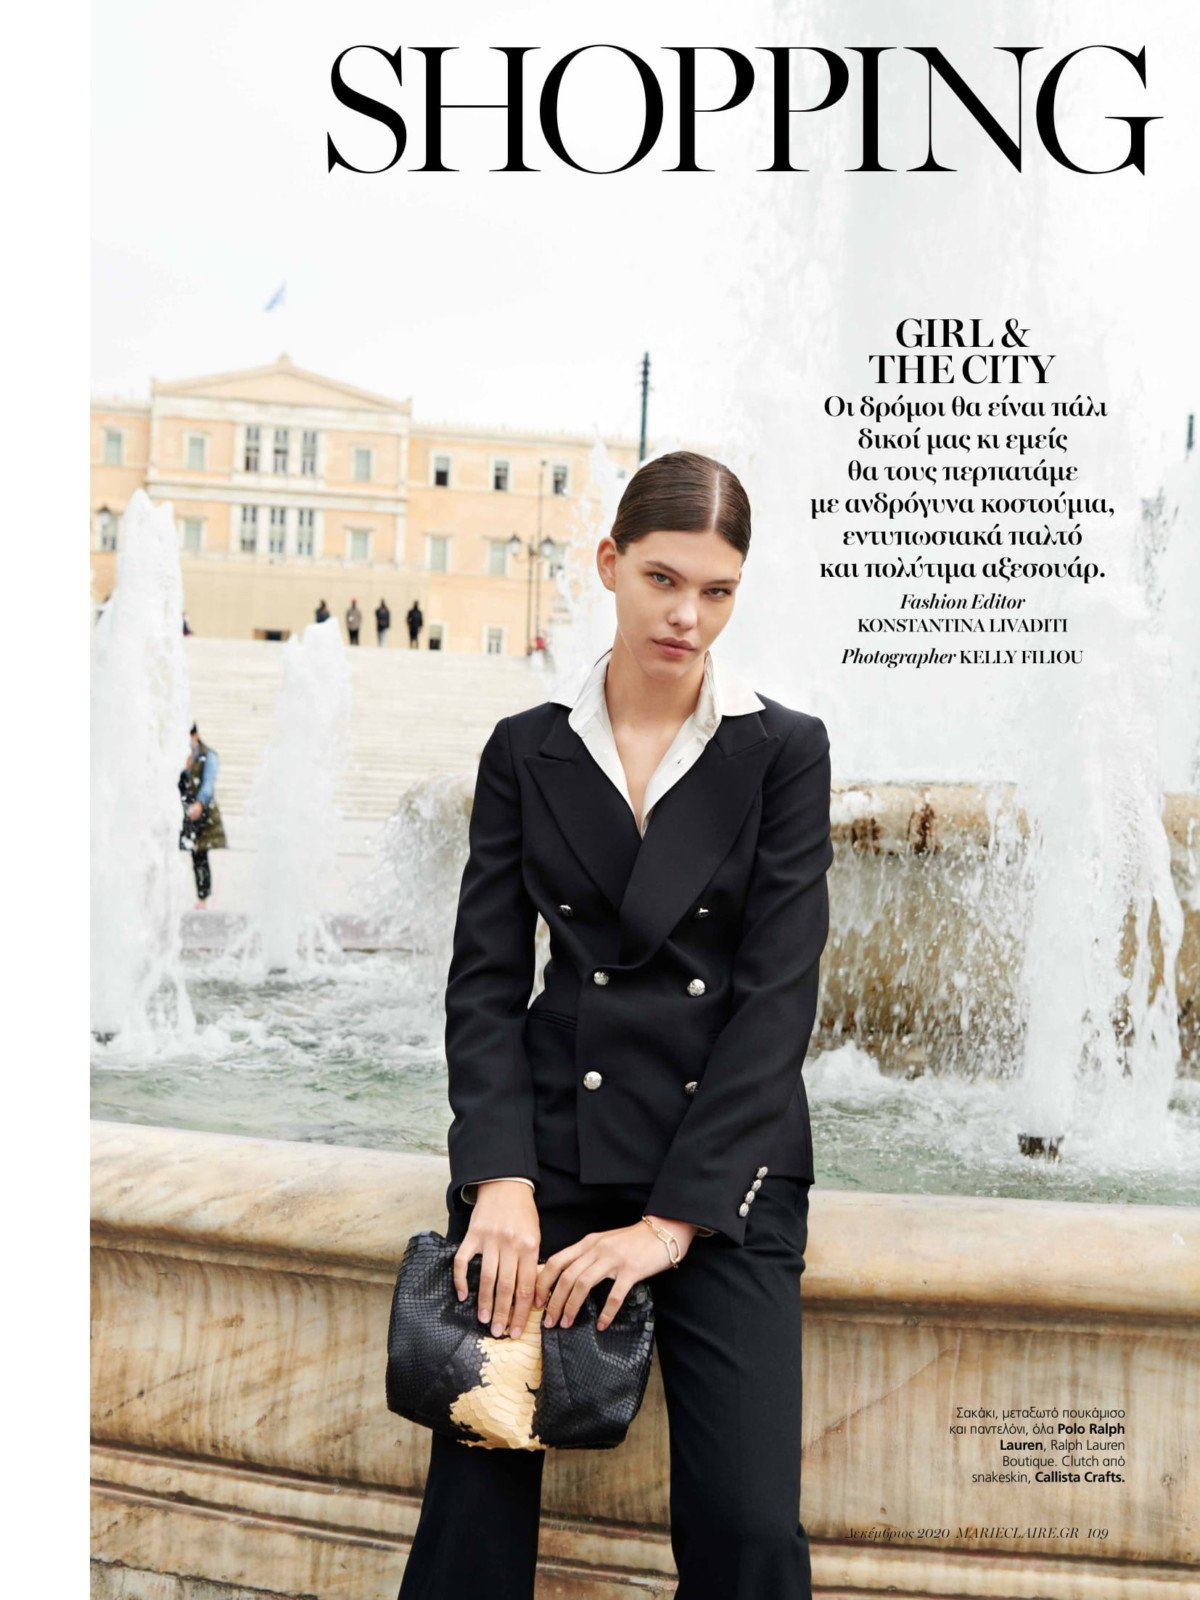 1-2020.11-Greece-Marie-Claire-dec-issue-by-Kelly-Filiou-10.jpg